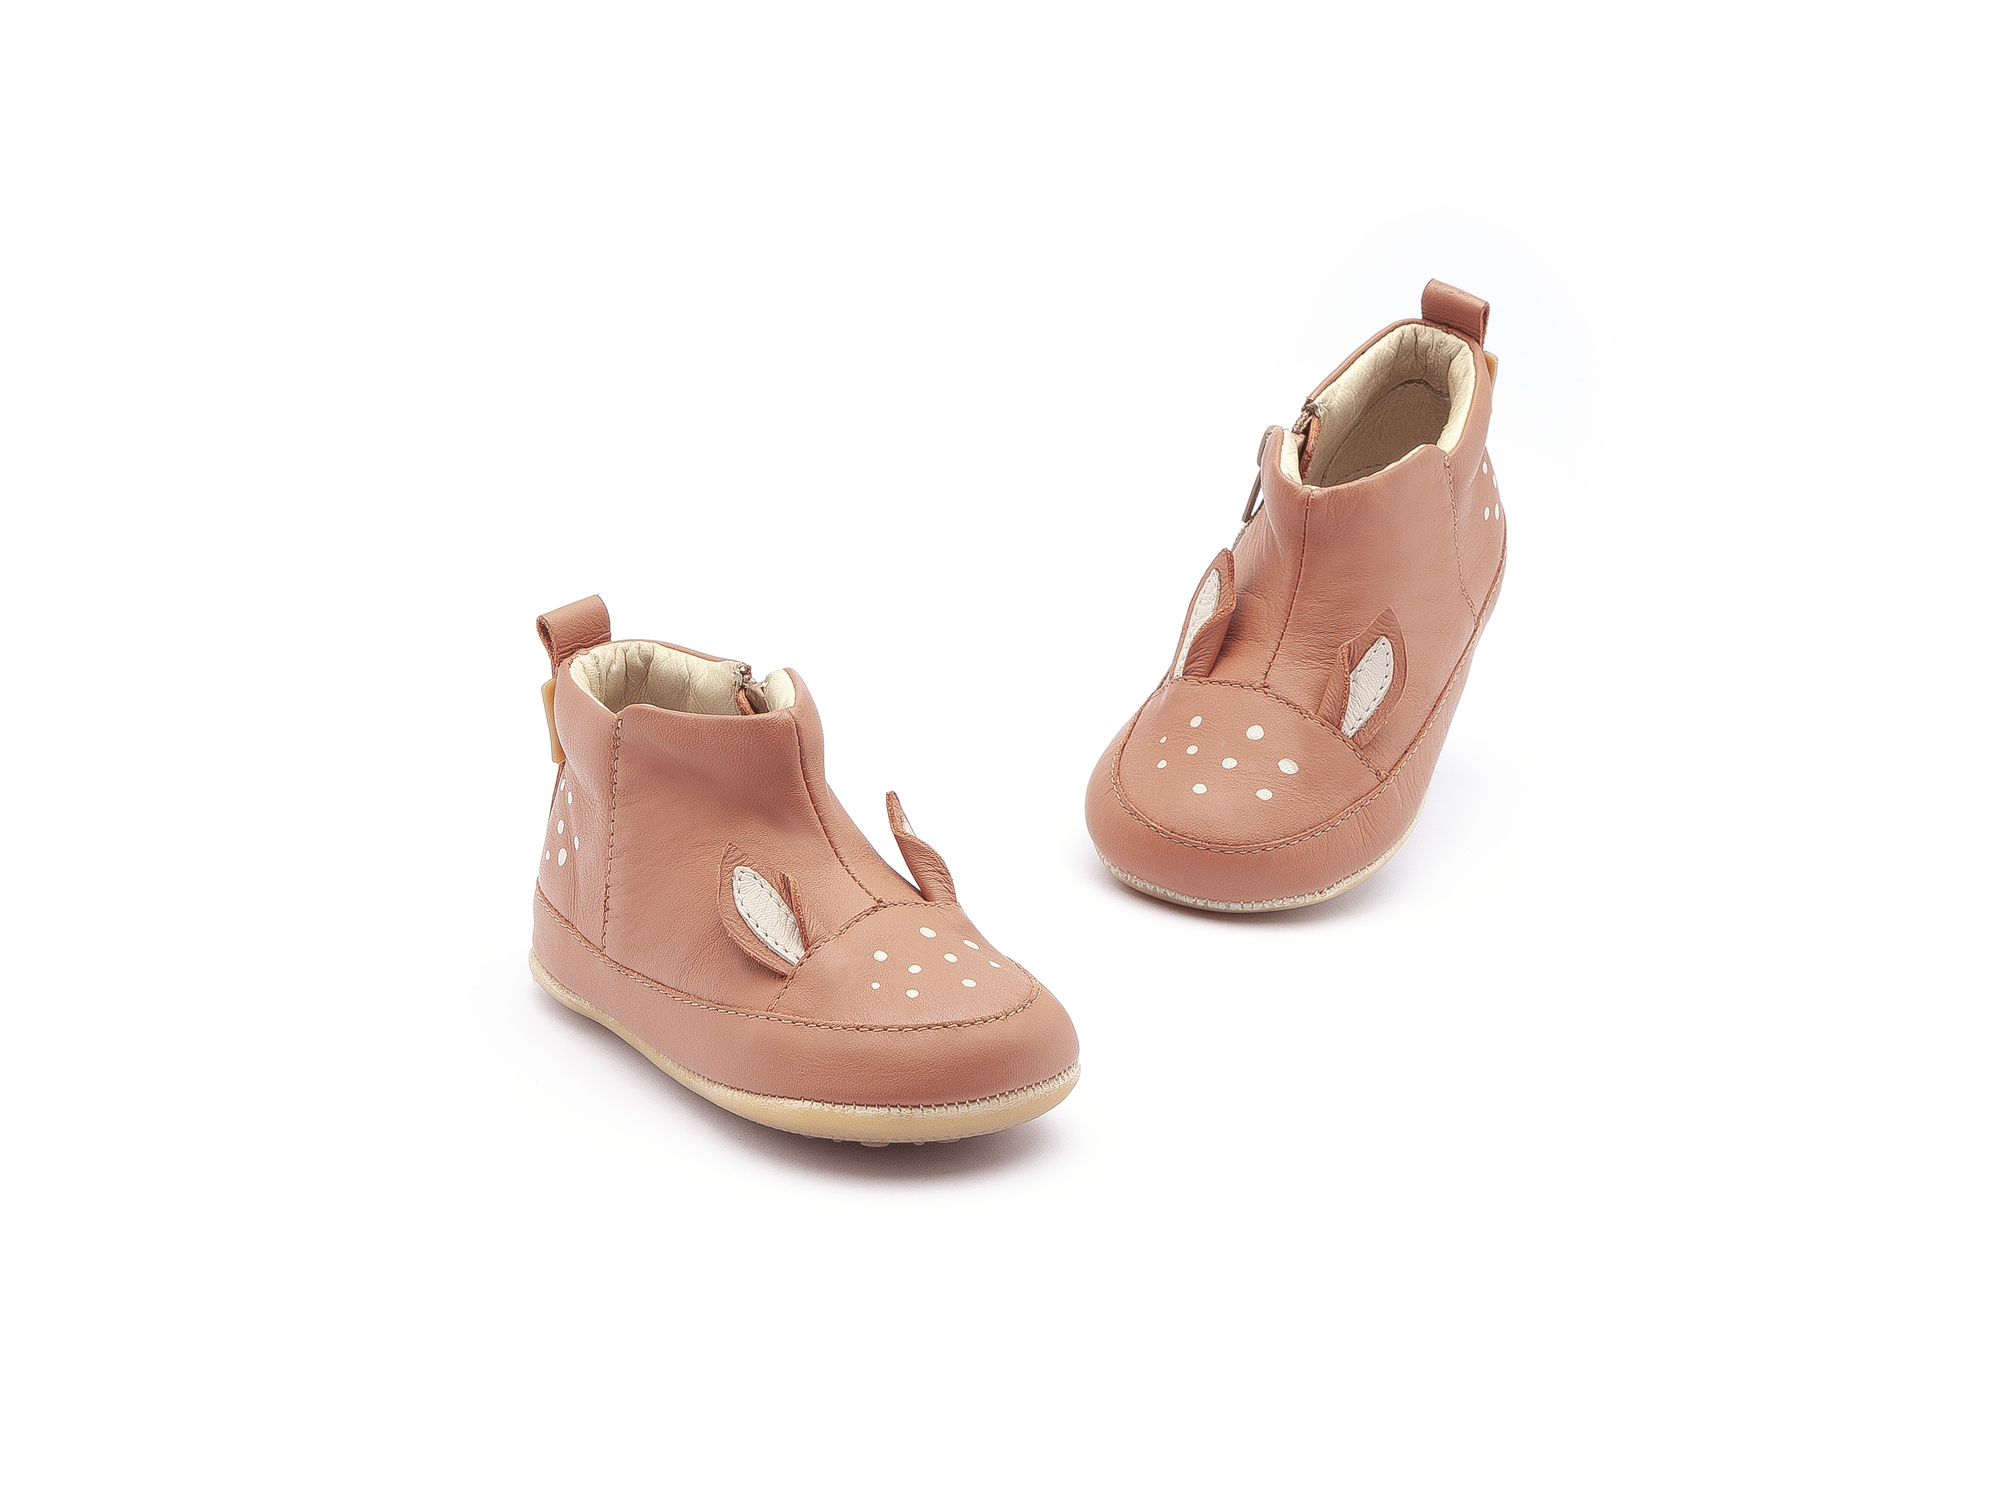 SIT & CRAWL Boots for Girls Fawny | Tip Toey Joey - Australia - 3